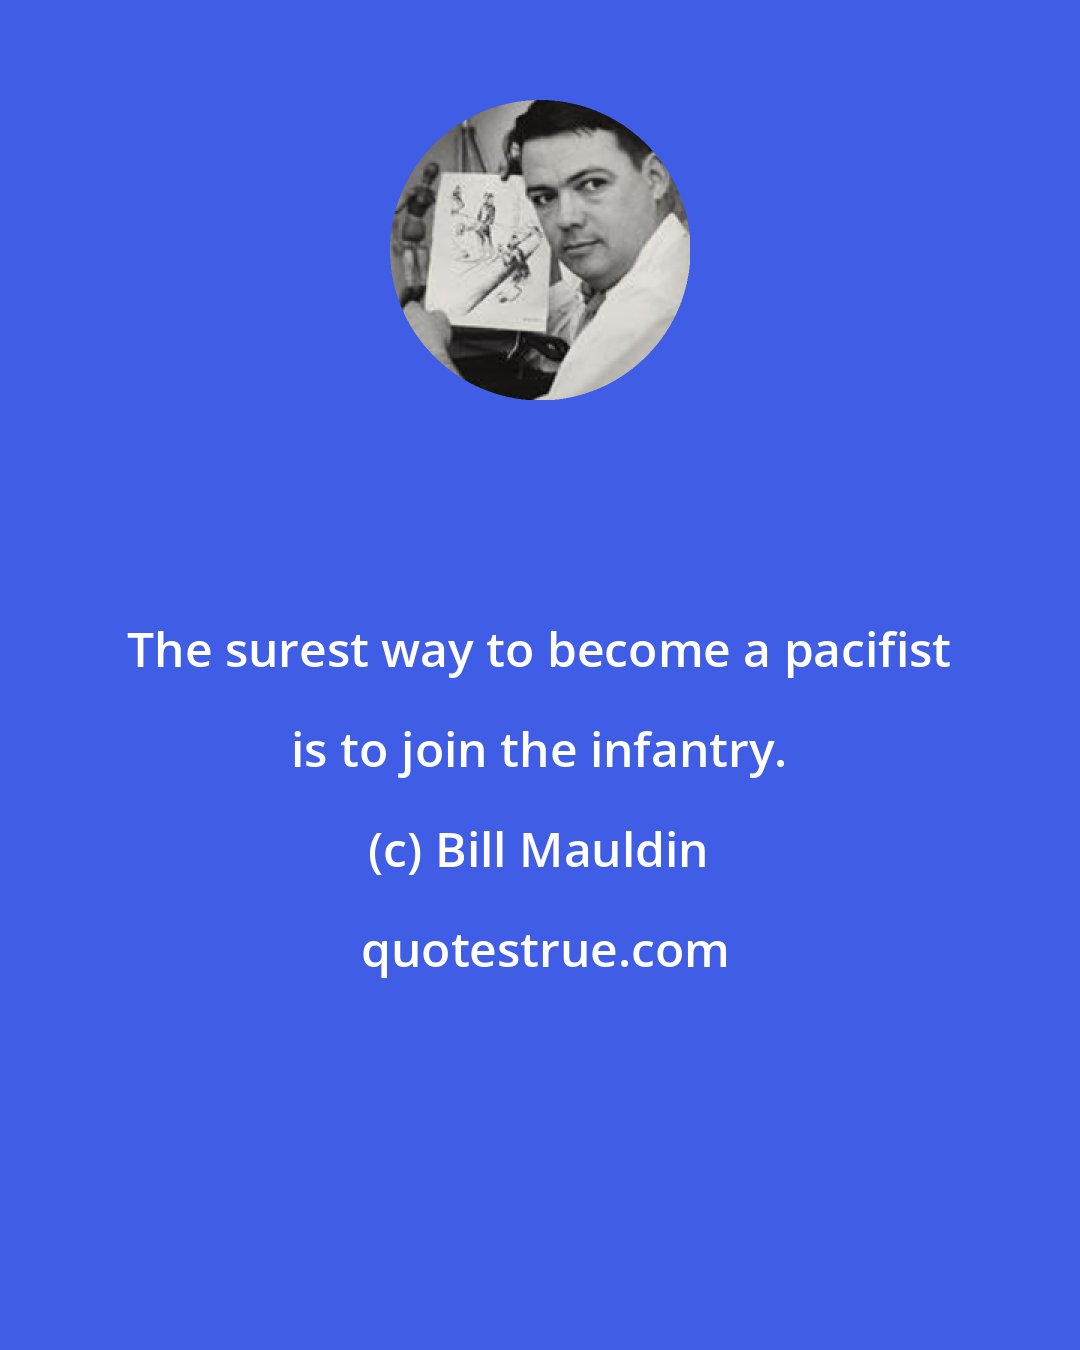 Bill Mauldin: The surest way to become a pacifist is to join the infantry.